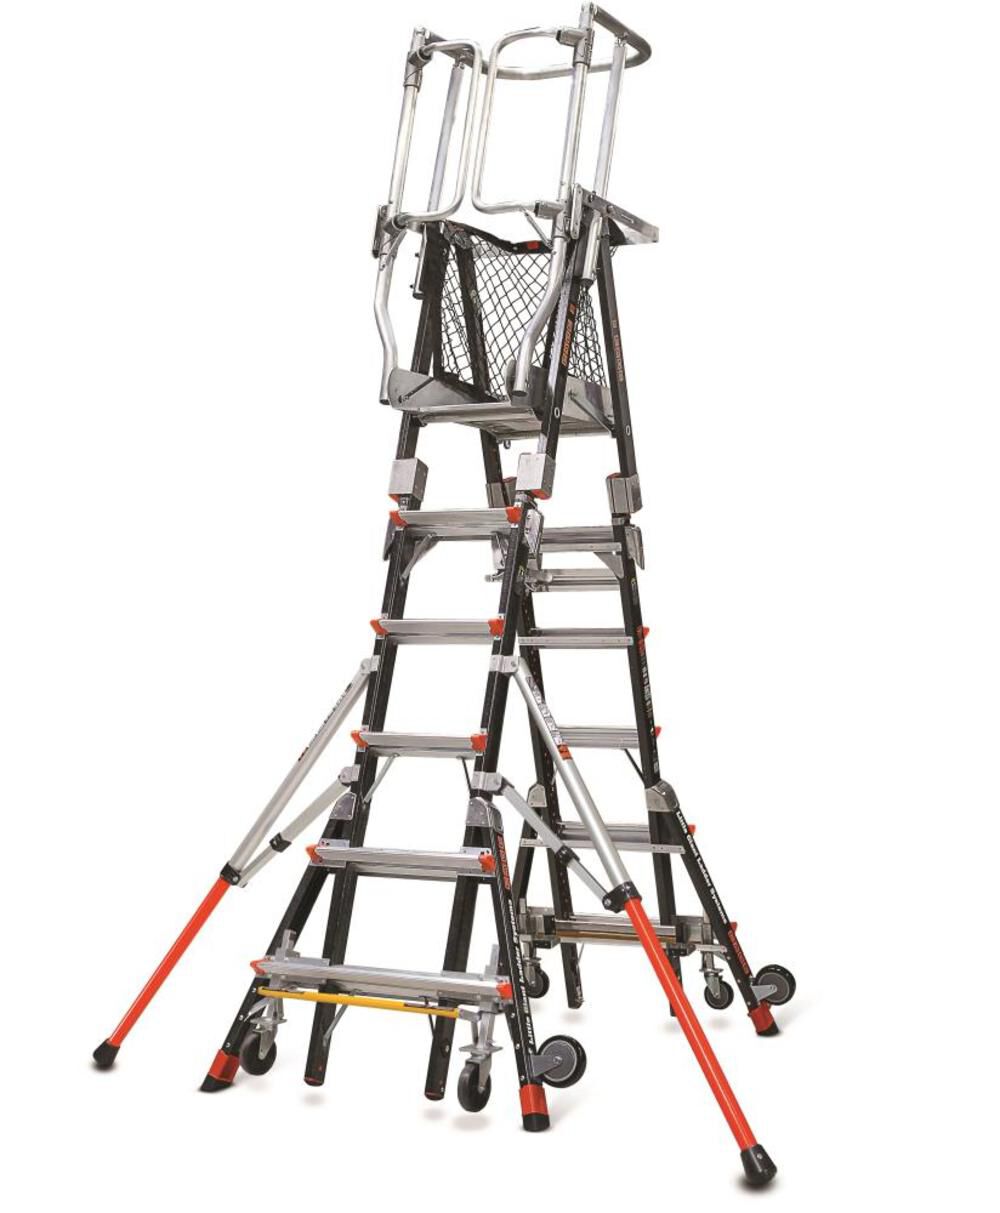 Compact Cage Model 6 Ft. to 10 Ft. IAA FG with Side Tip Wheels and Ratchet Levelers 19506-815